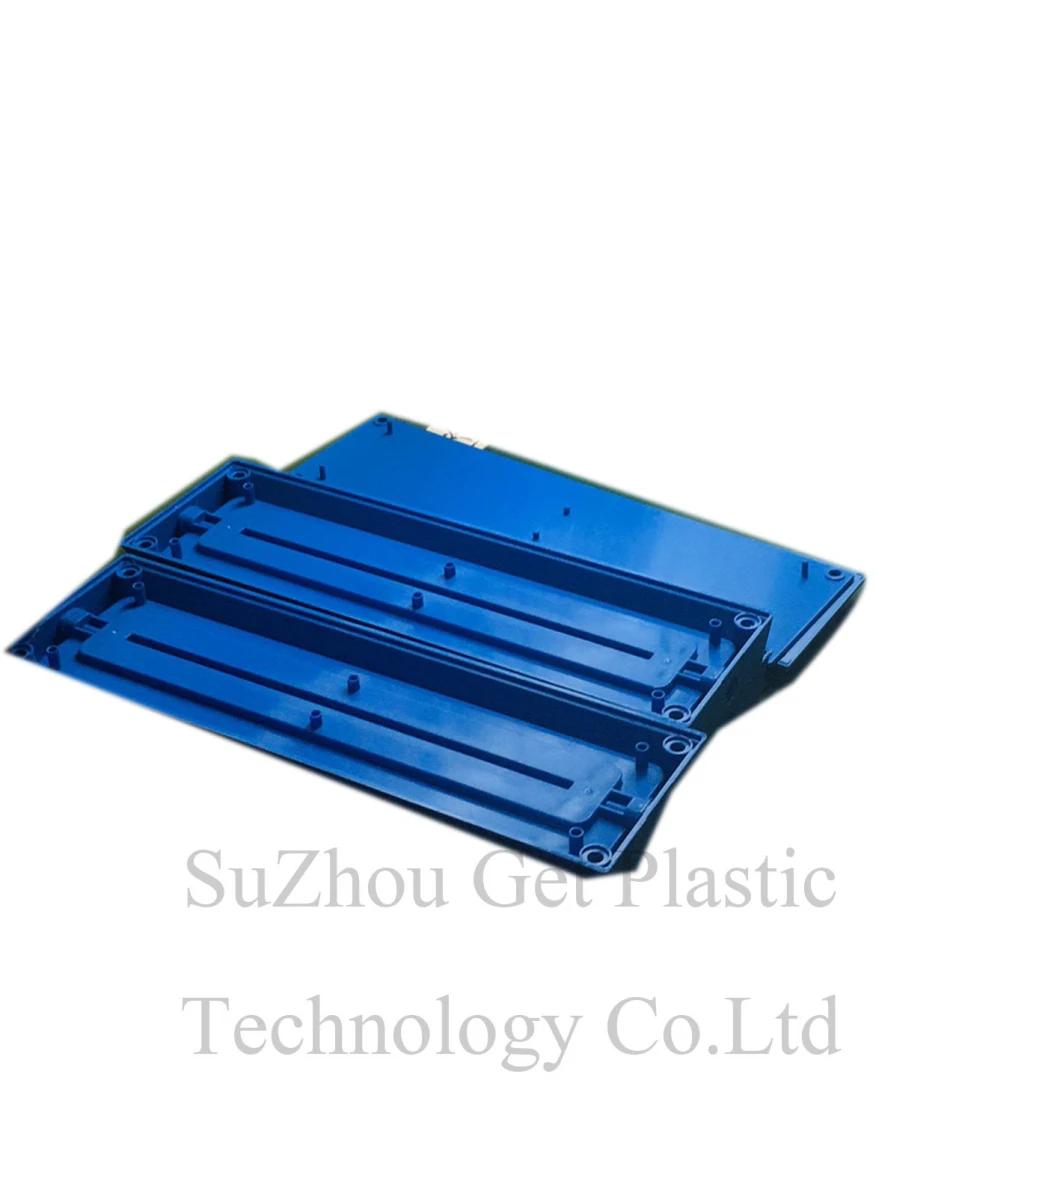 Plastic Product Mold Injection in Plastic Factory